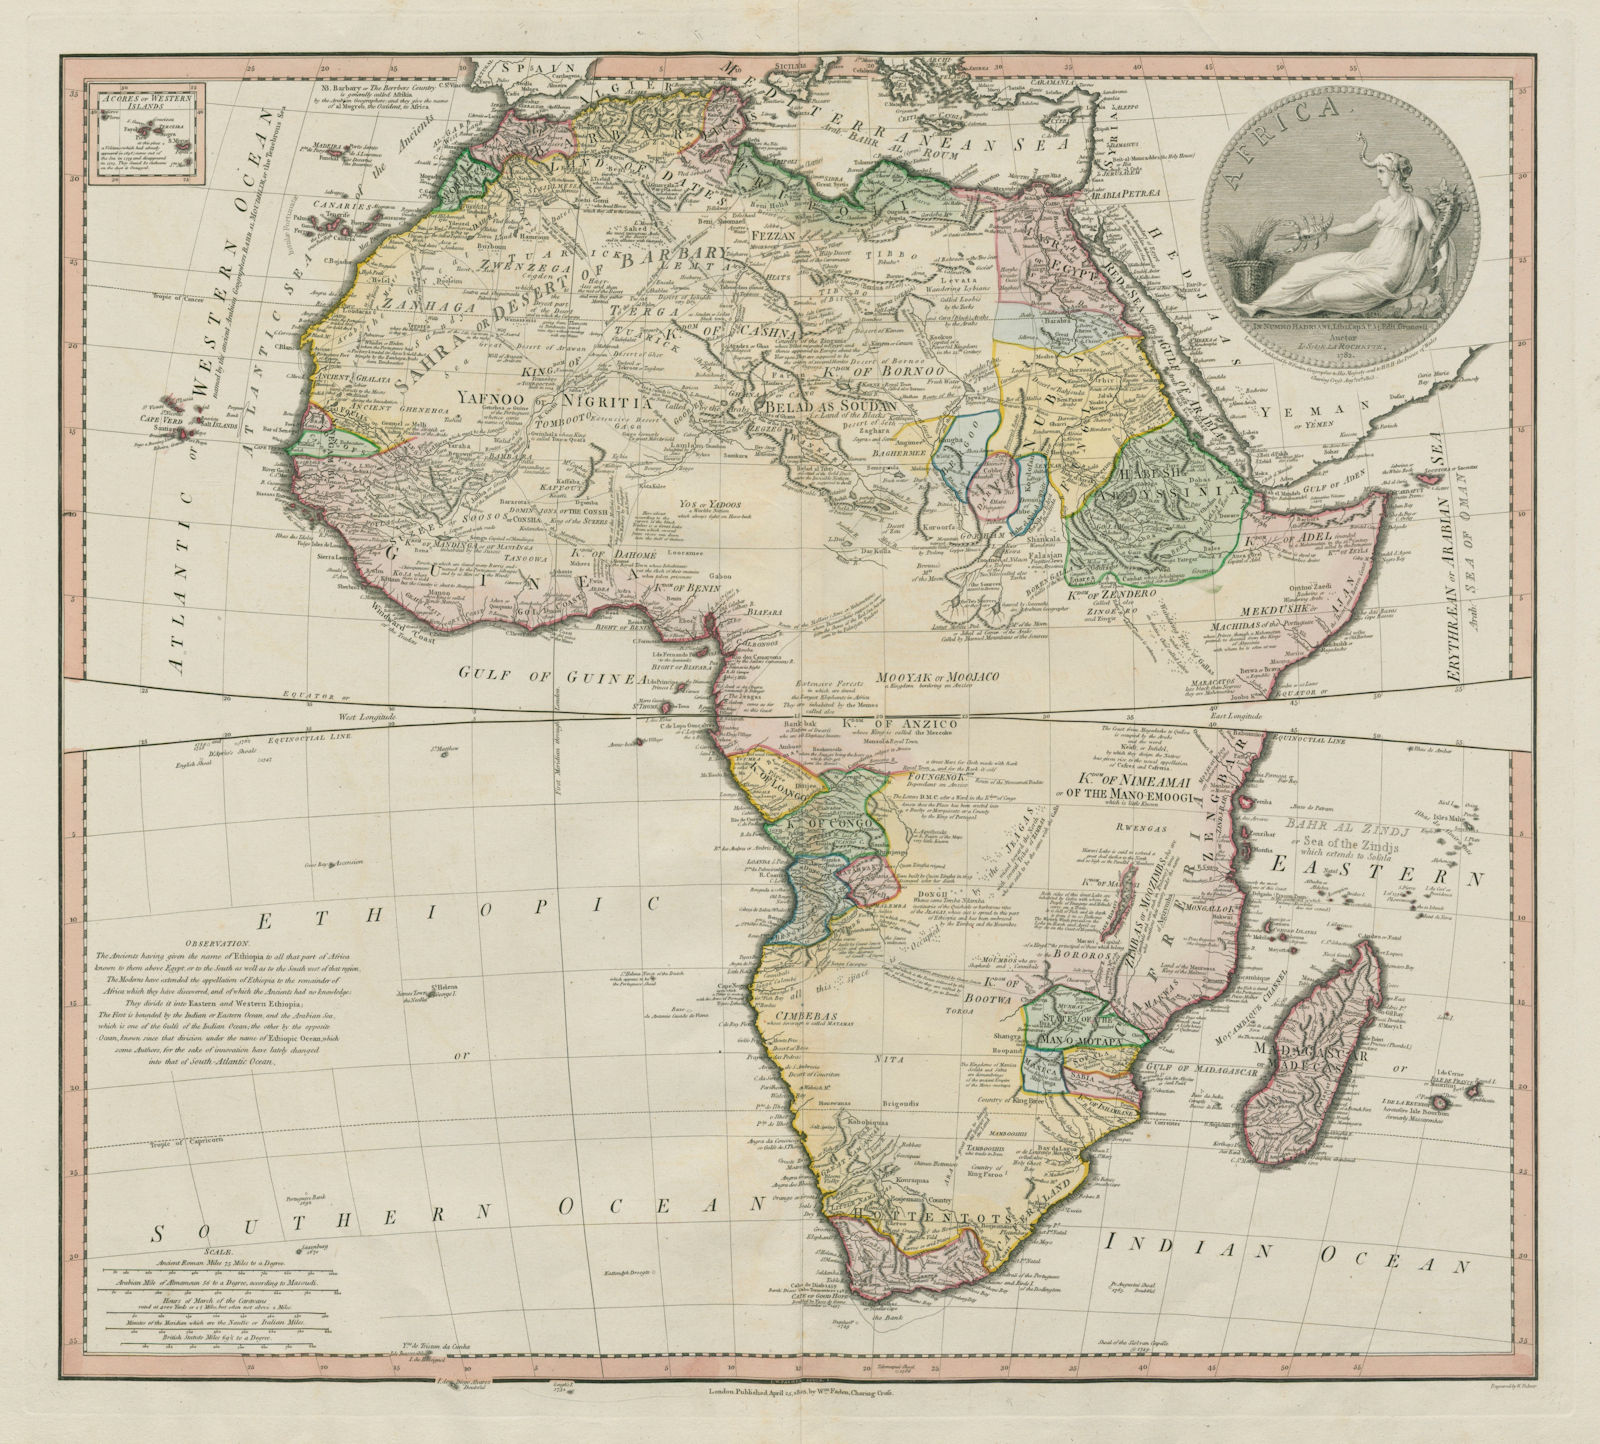 Africa by DELAROCHETTE / FADEN. Pre-colonial tribes & kingdoms 1803 old map